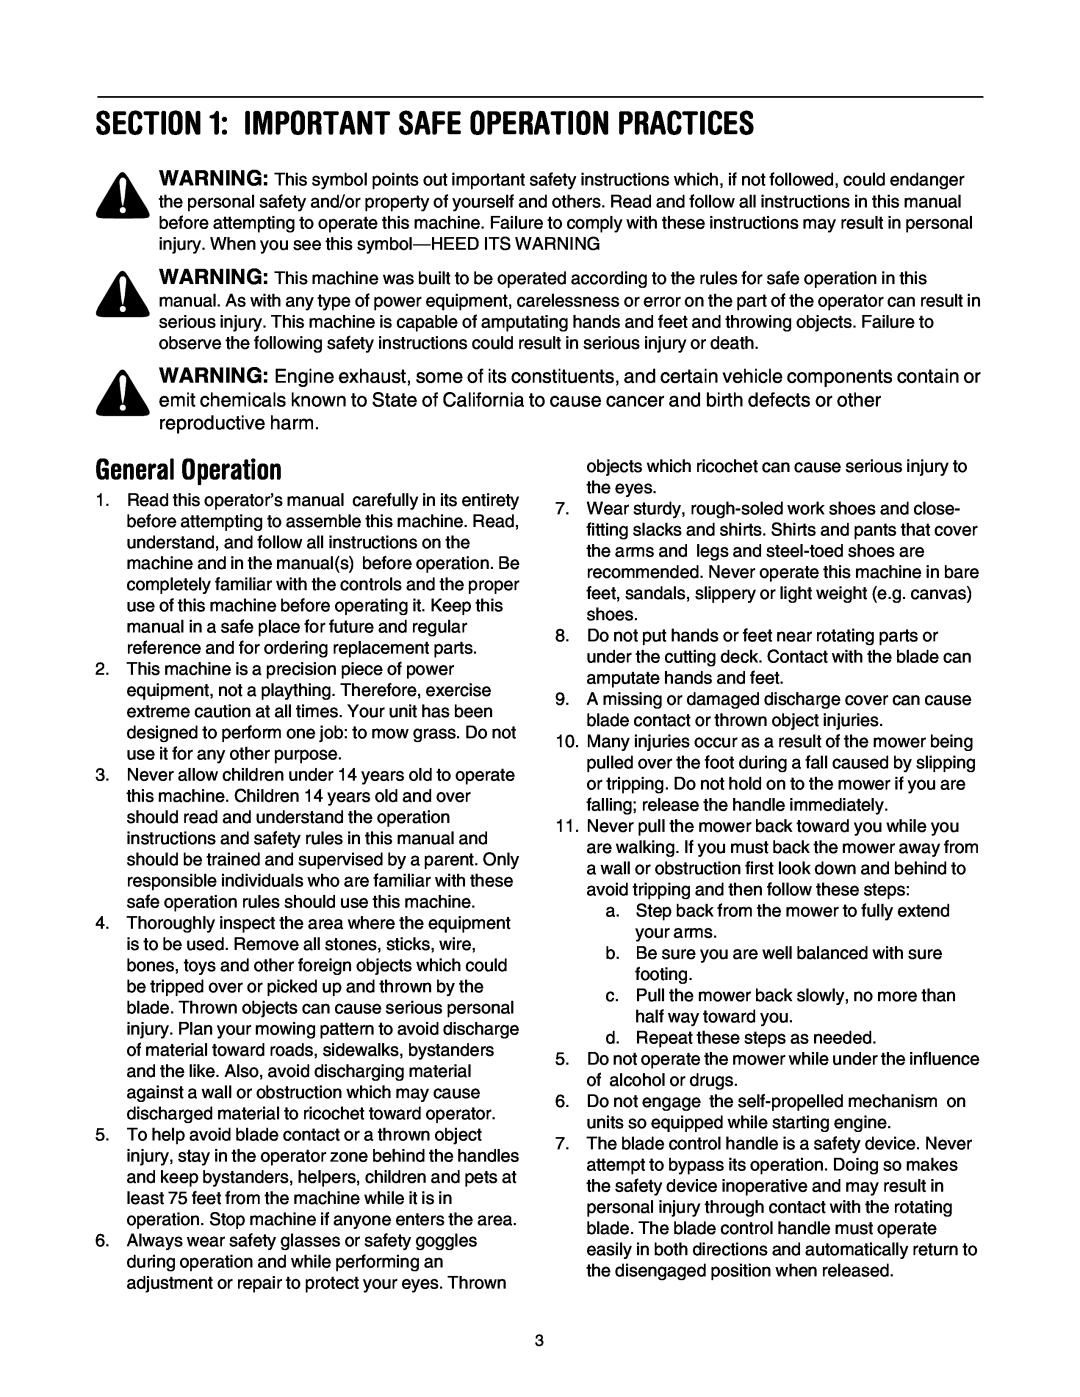 MTD 435 manual Important Safe Operation Practices, General Operation 